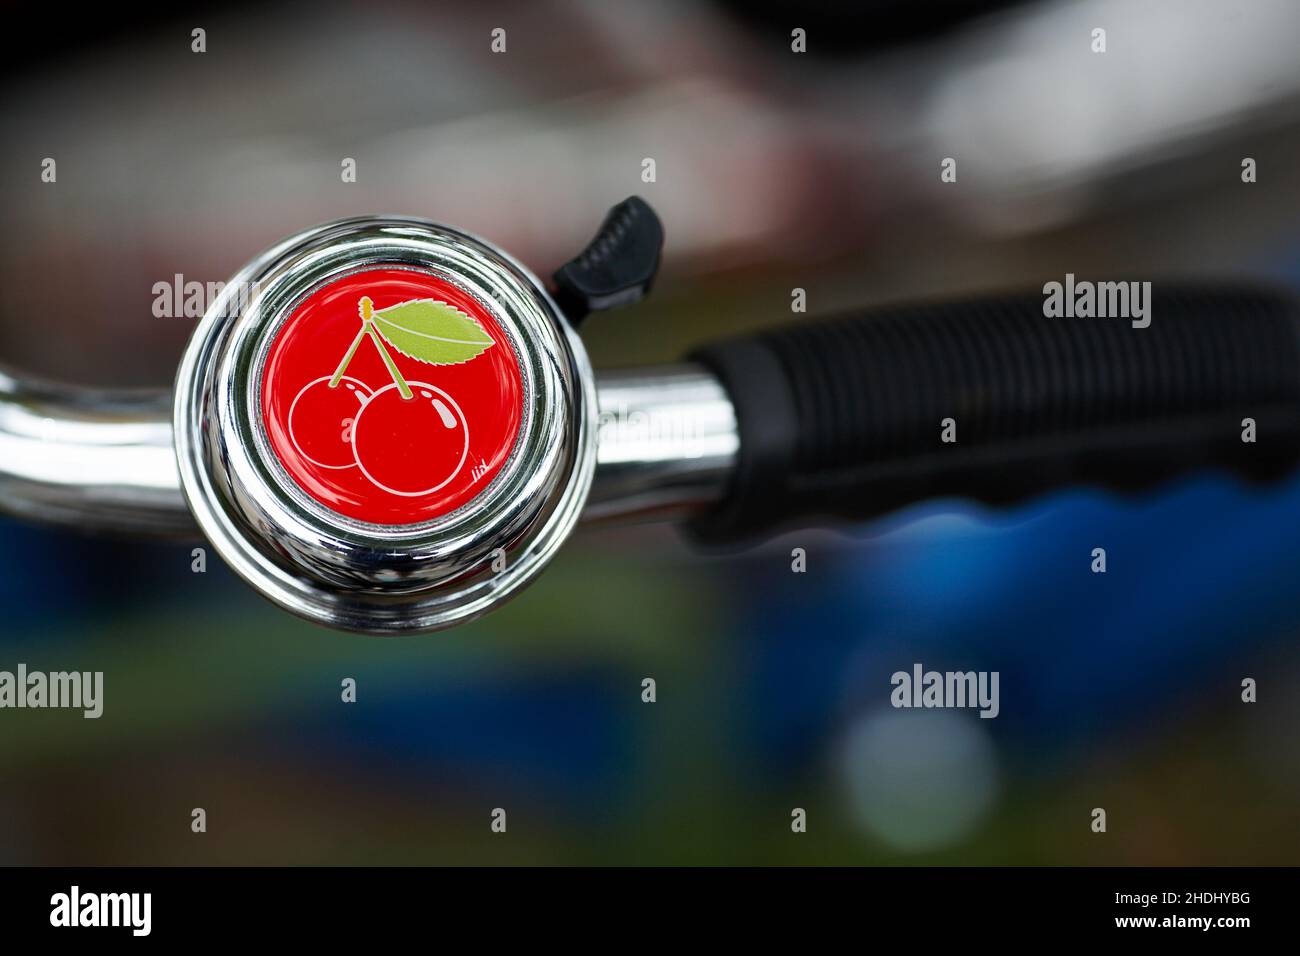 Cherry bicycle bell .Bicycle handlebar with bell with blurred background. Stock Photo